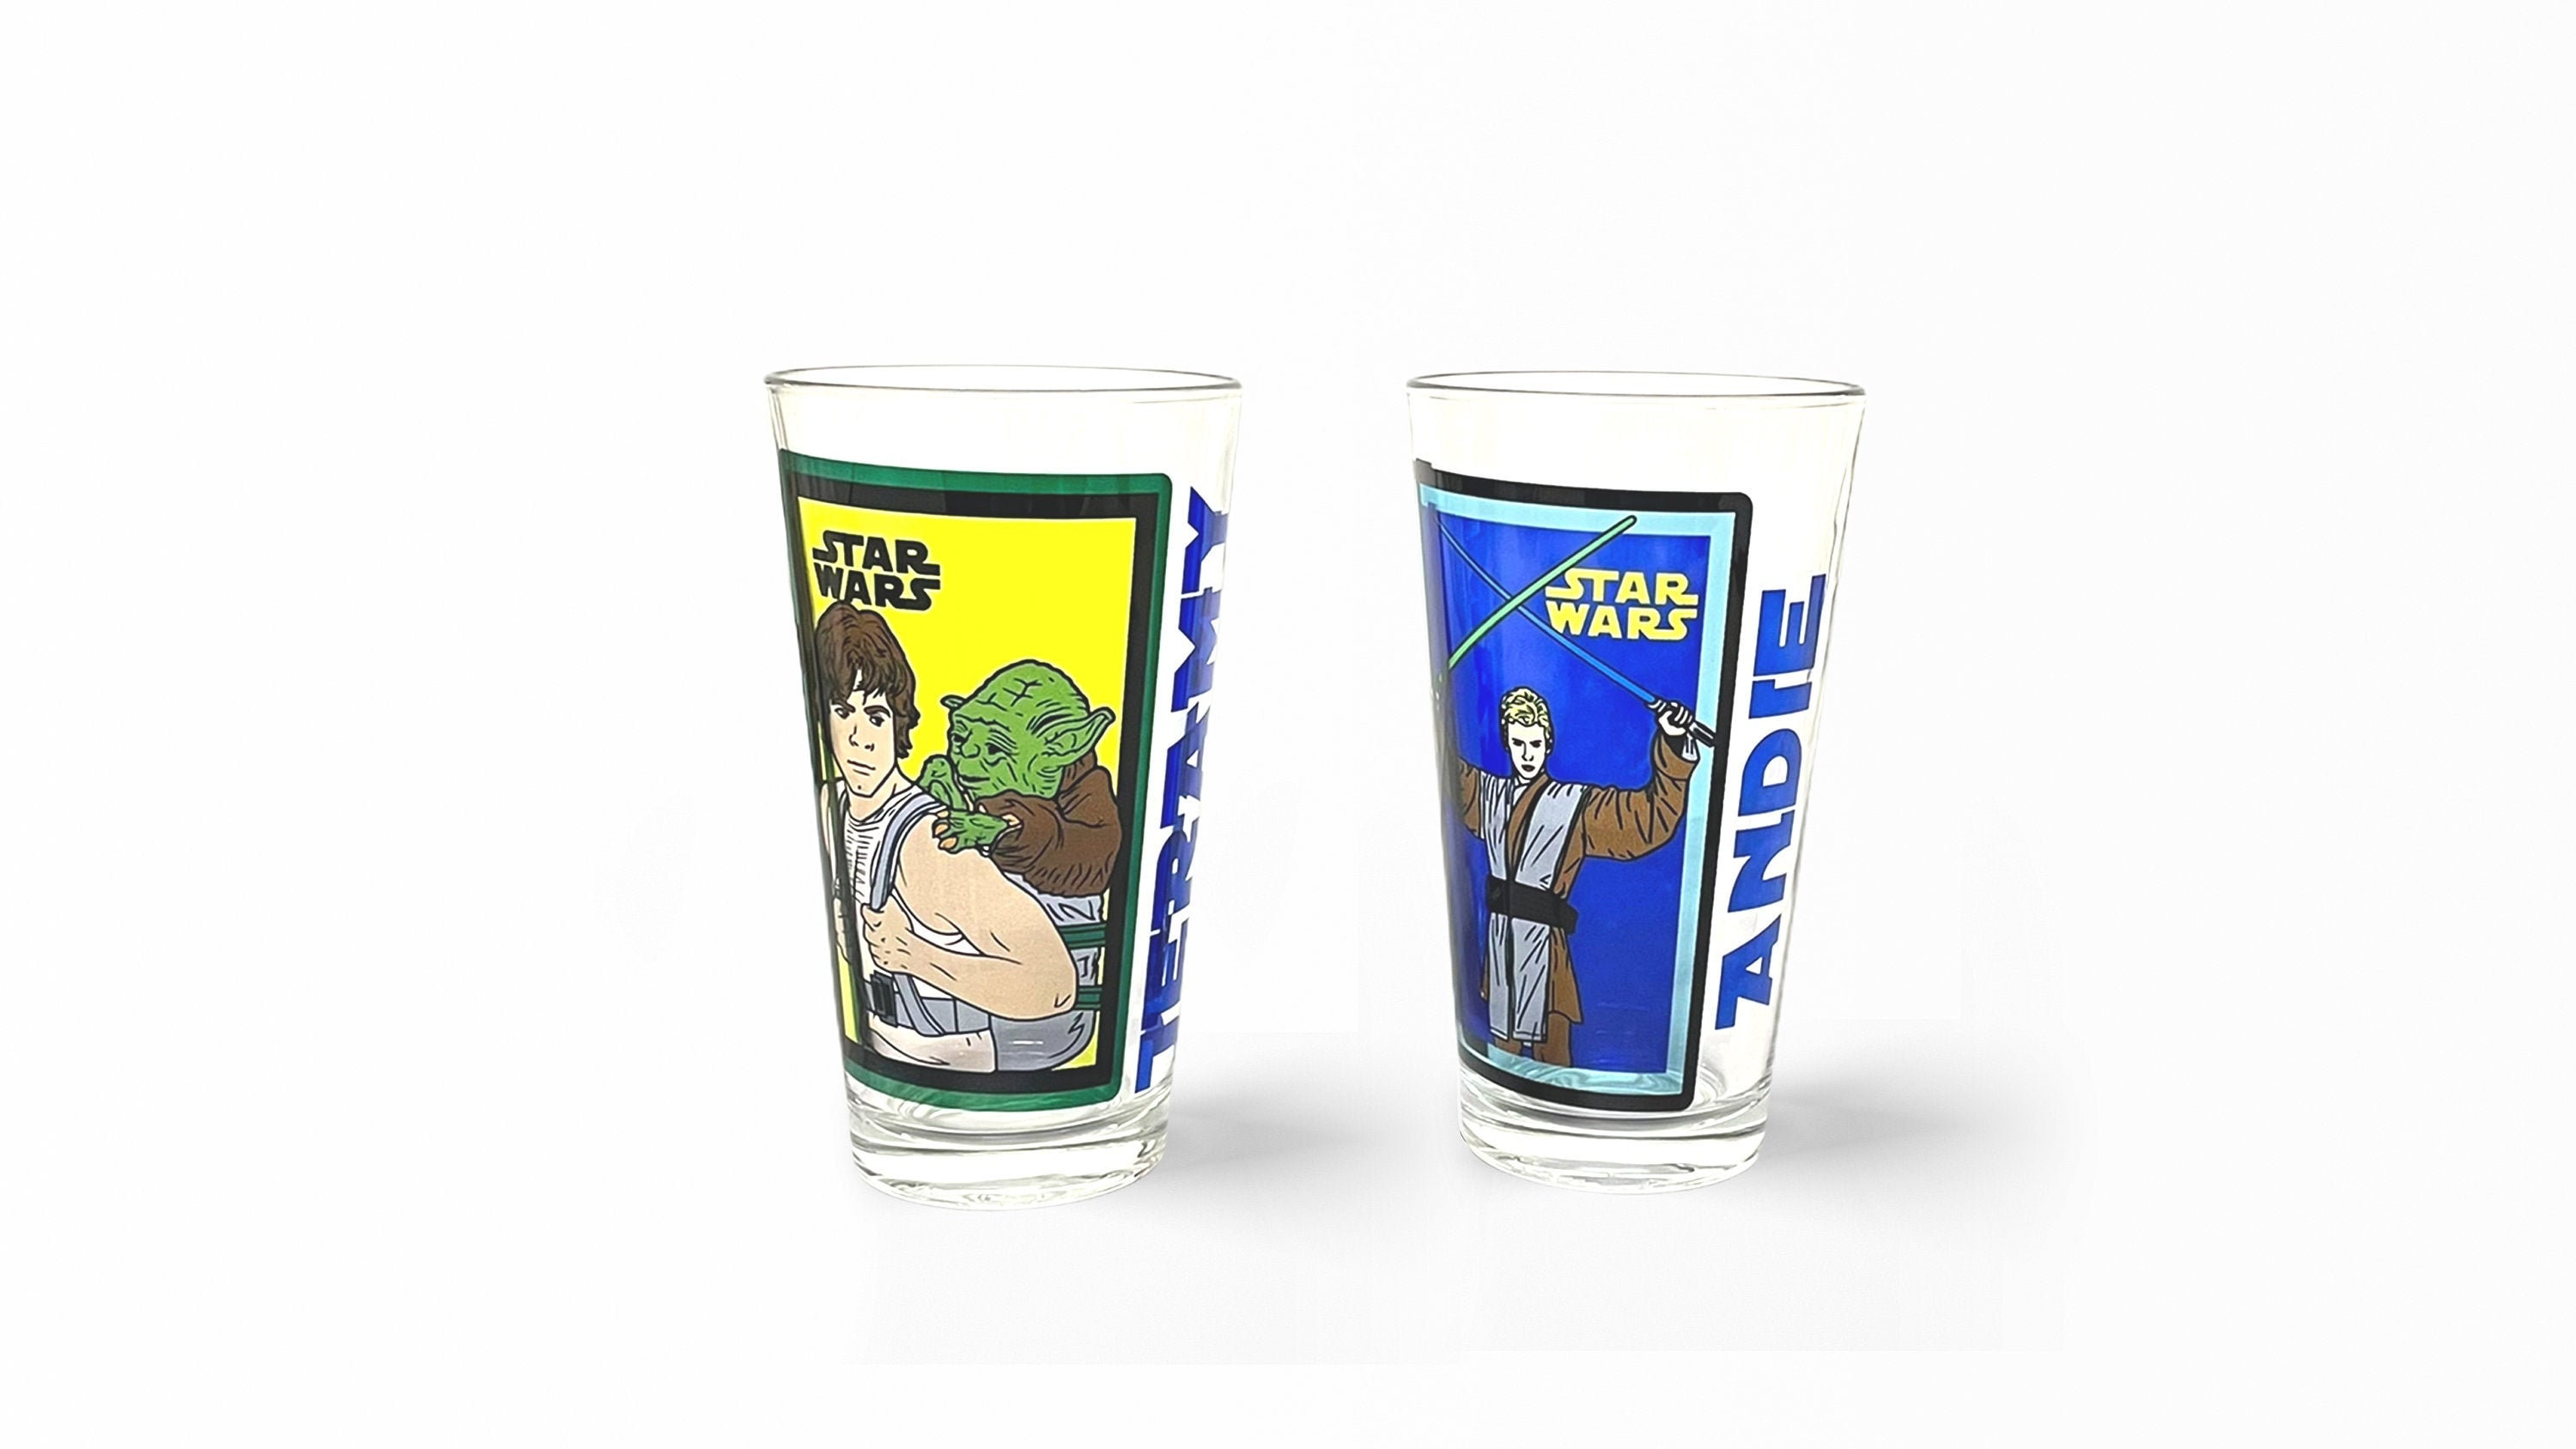 Star Wars Rogue One Pint Glass Tumbler - Officially Licensed (5-3/4 Tall)